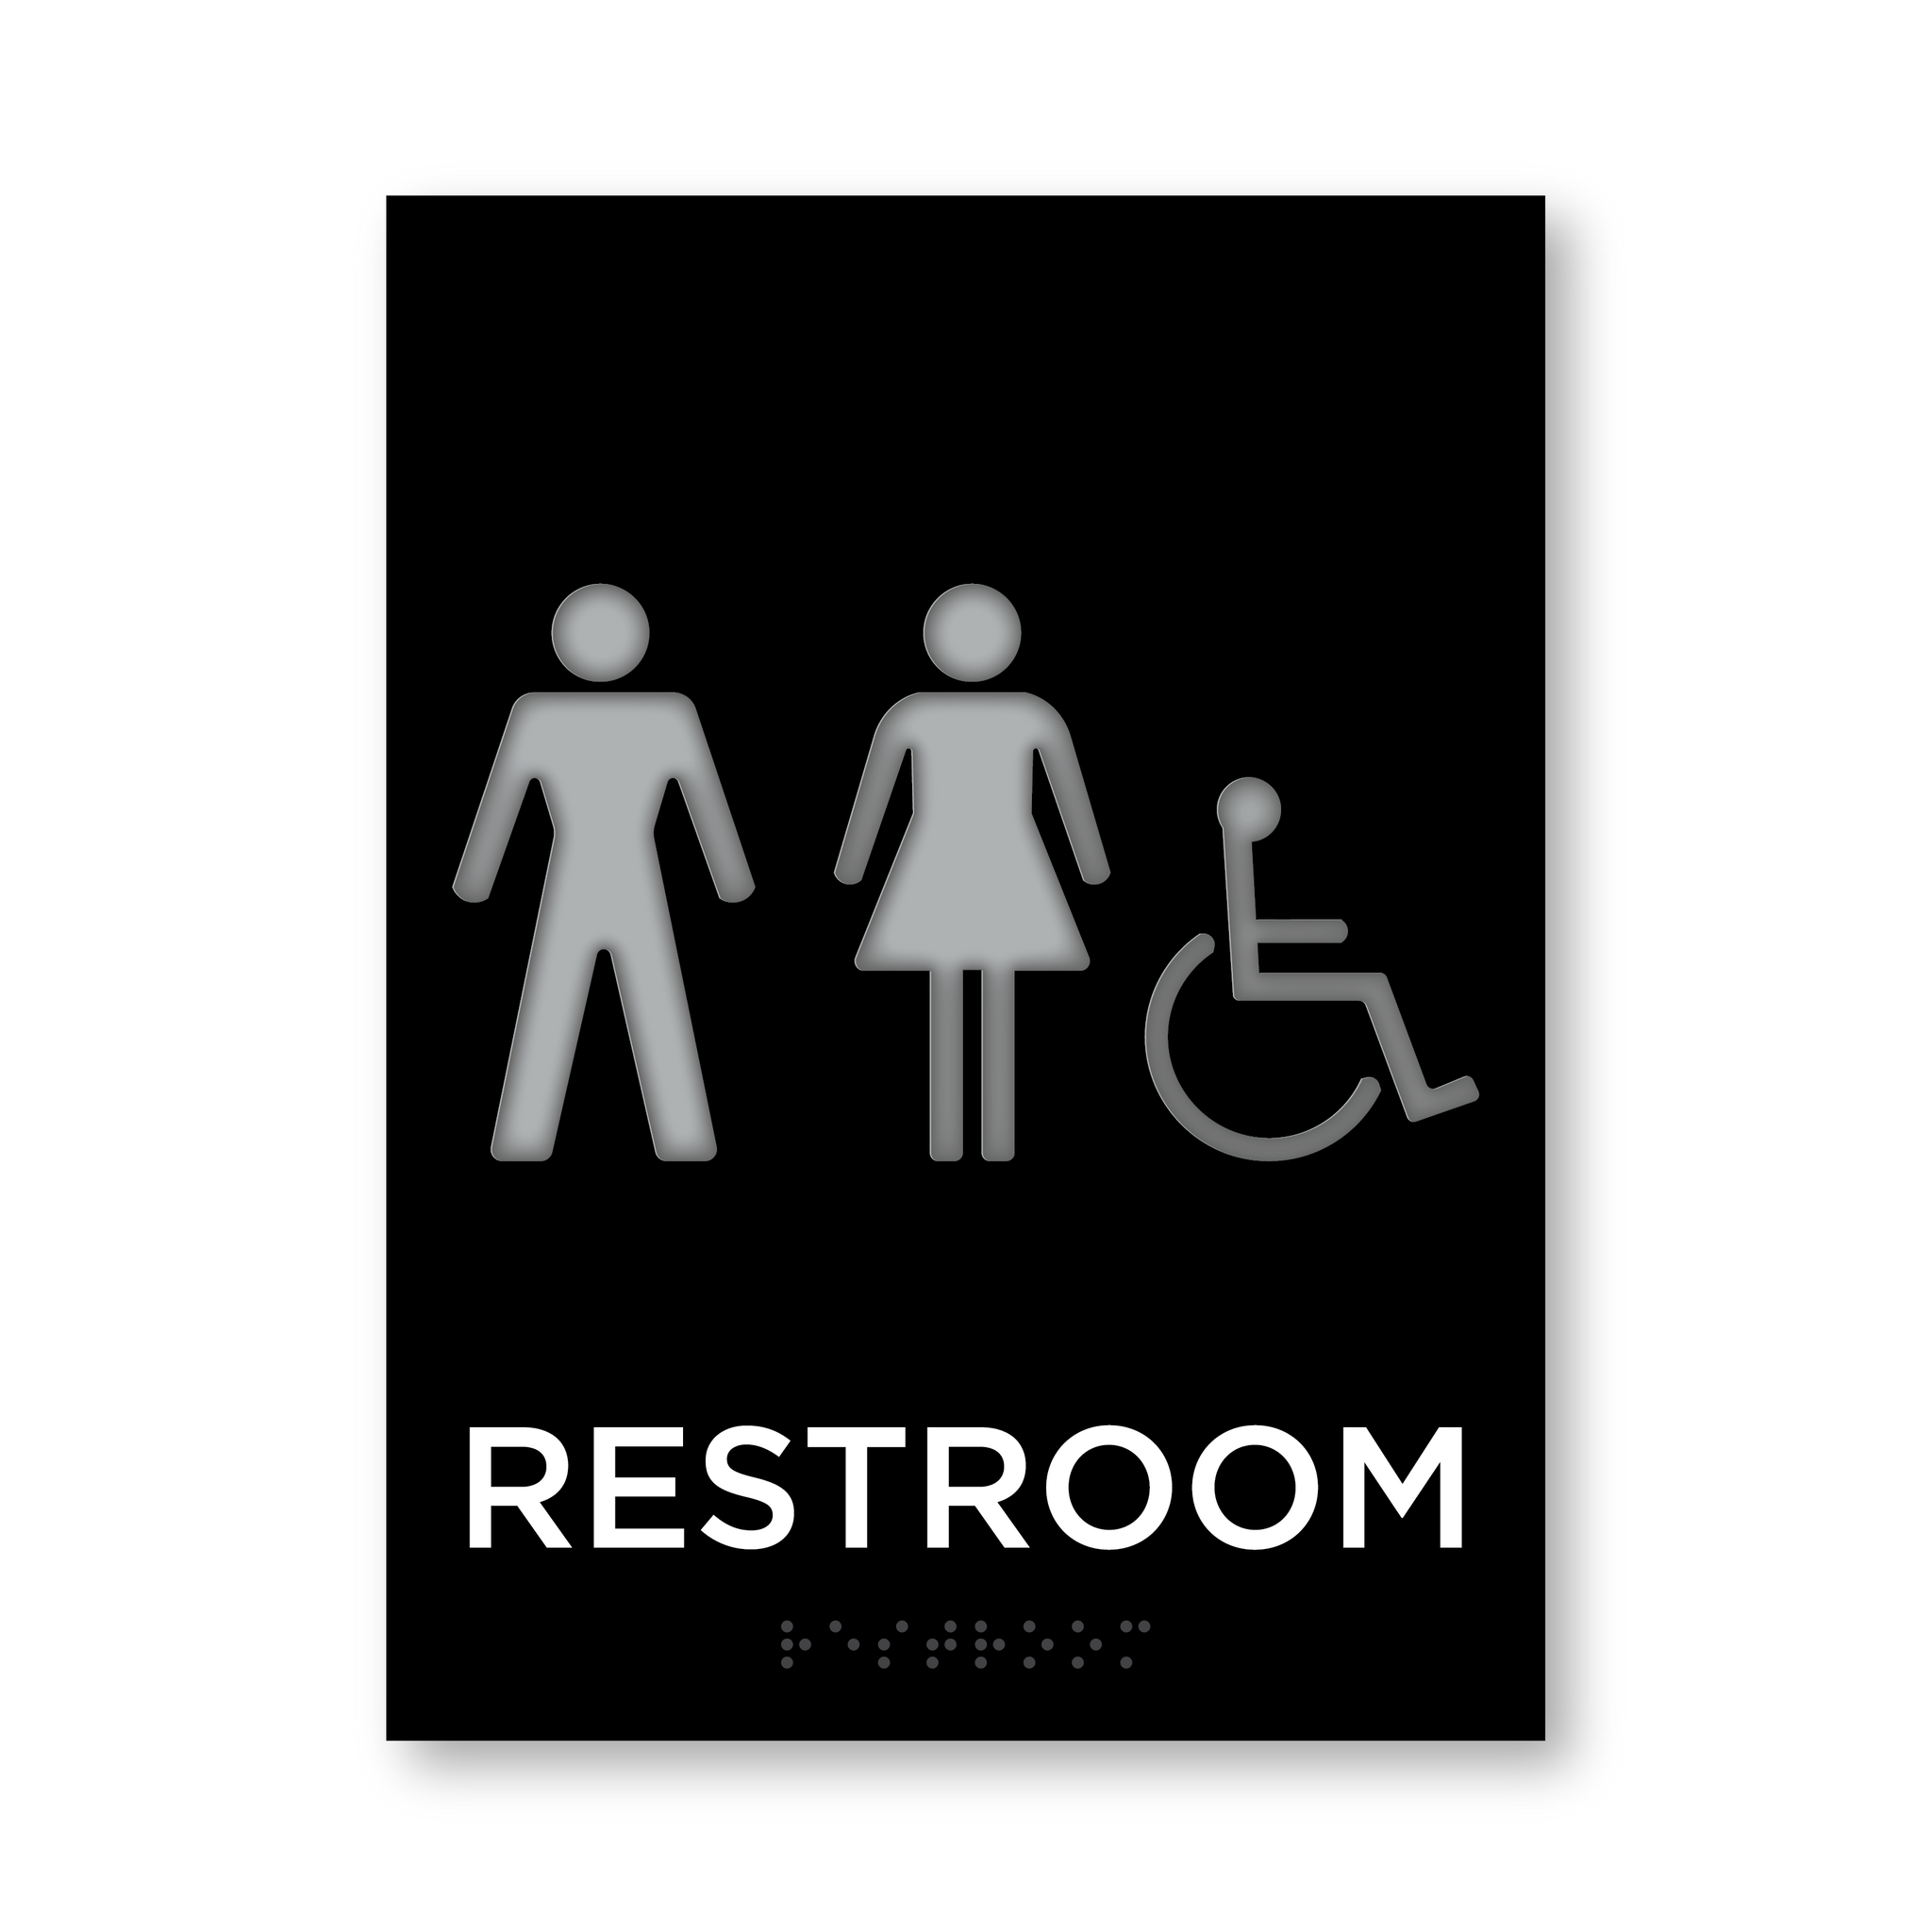 A Touch of Flair Restroom - Unisex Handicap Accessible